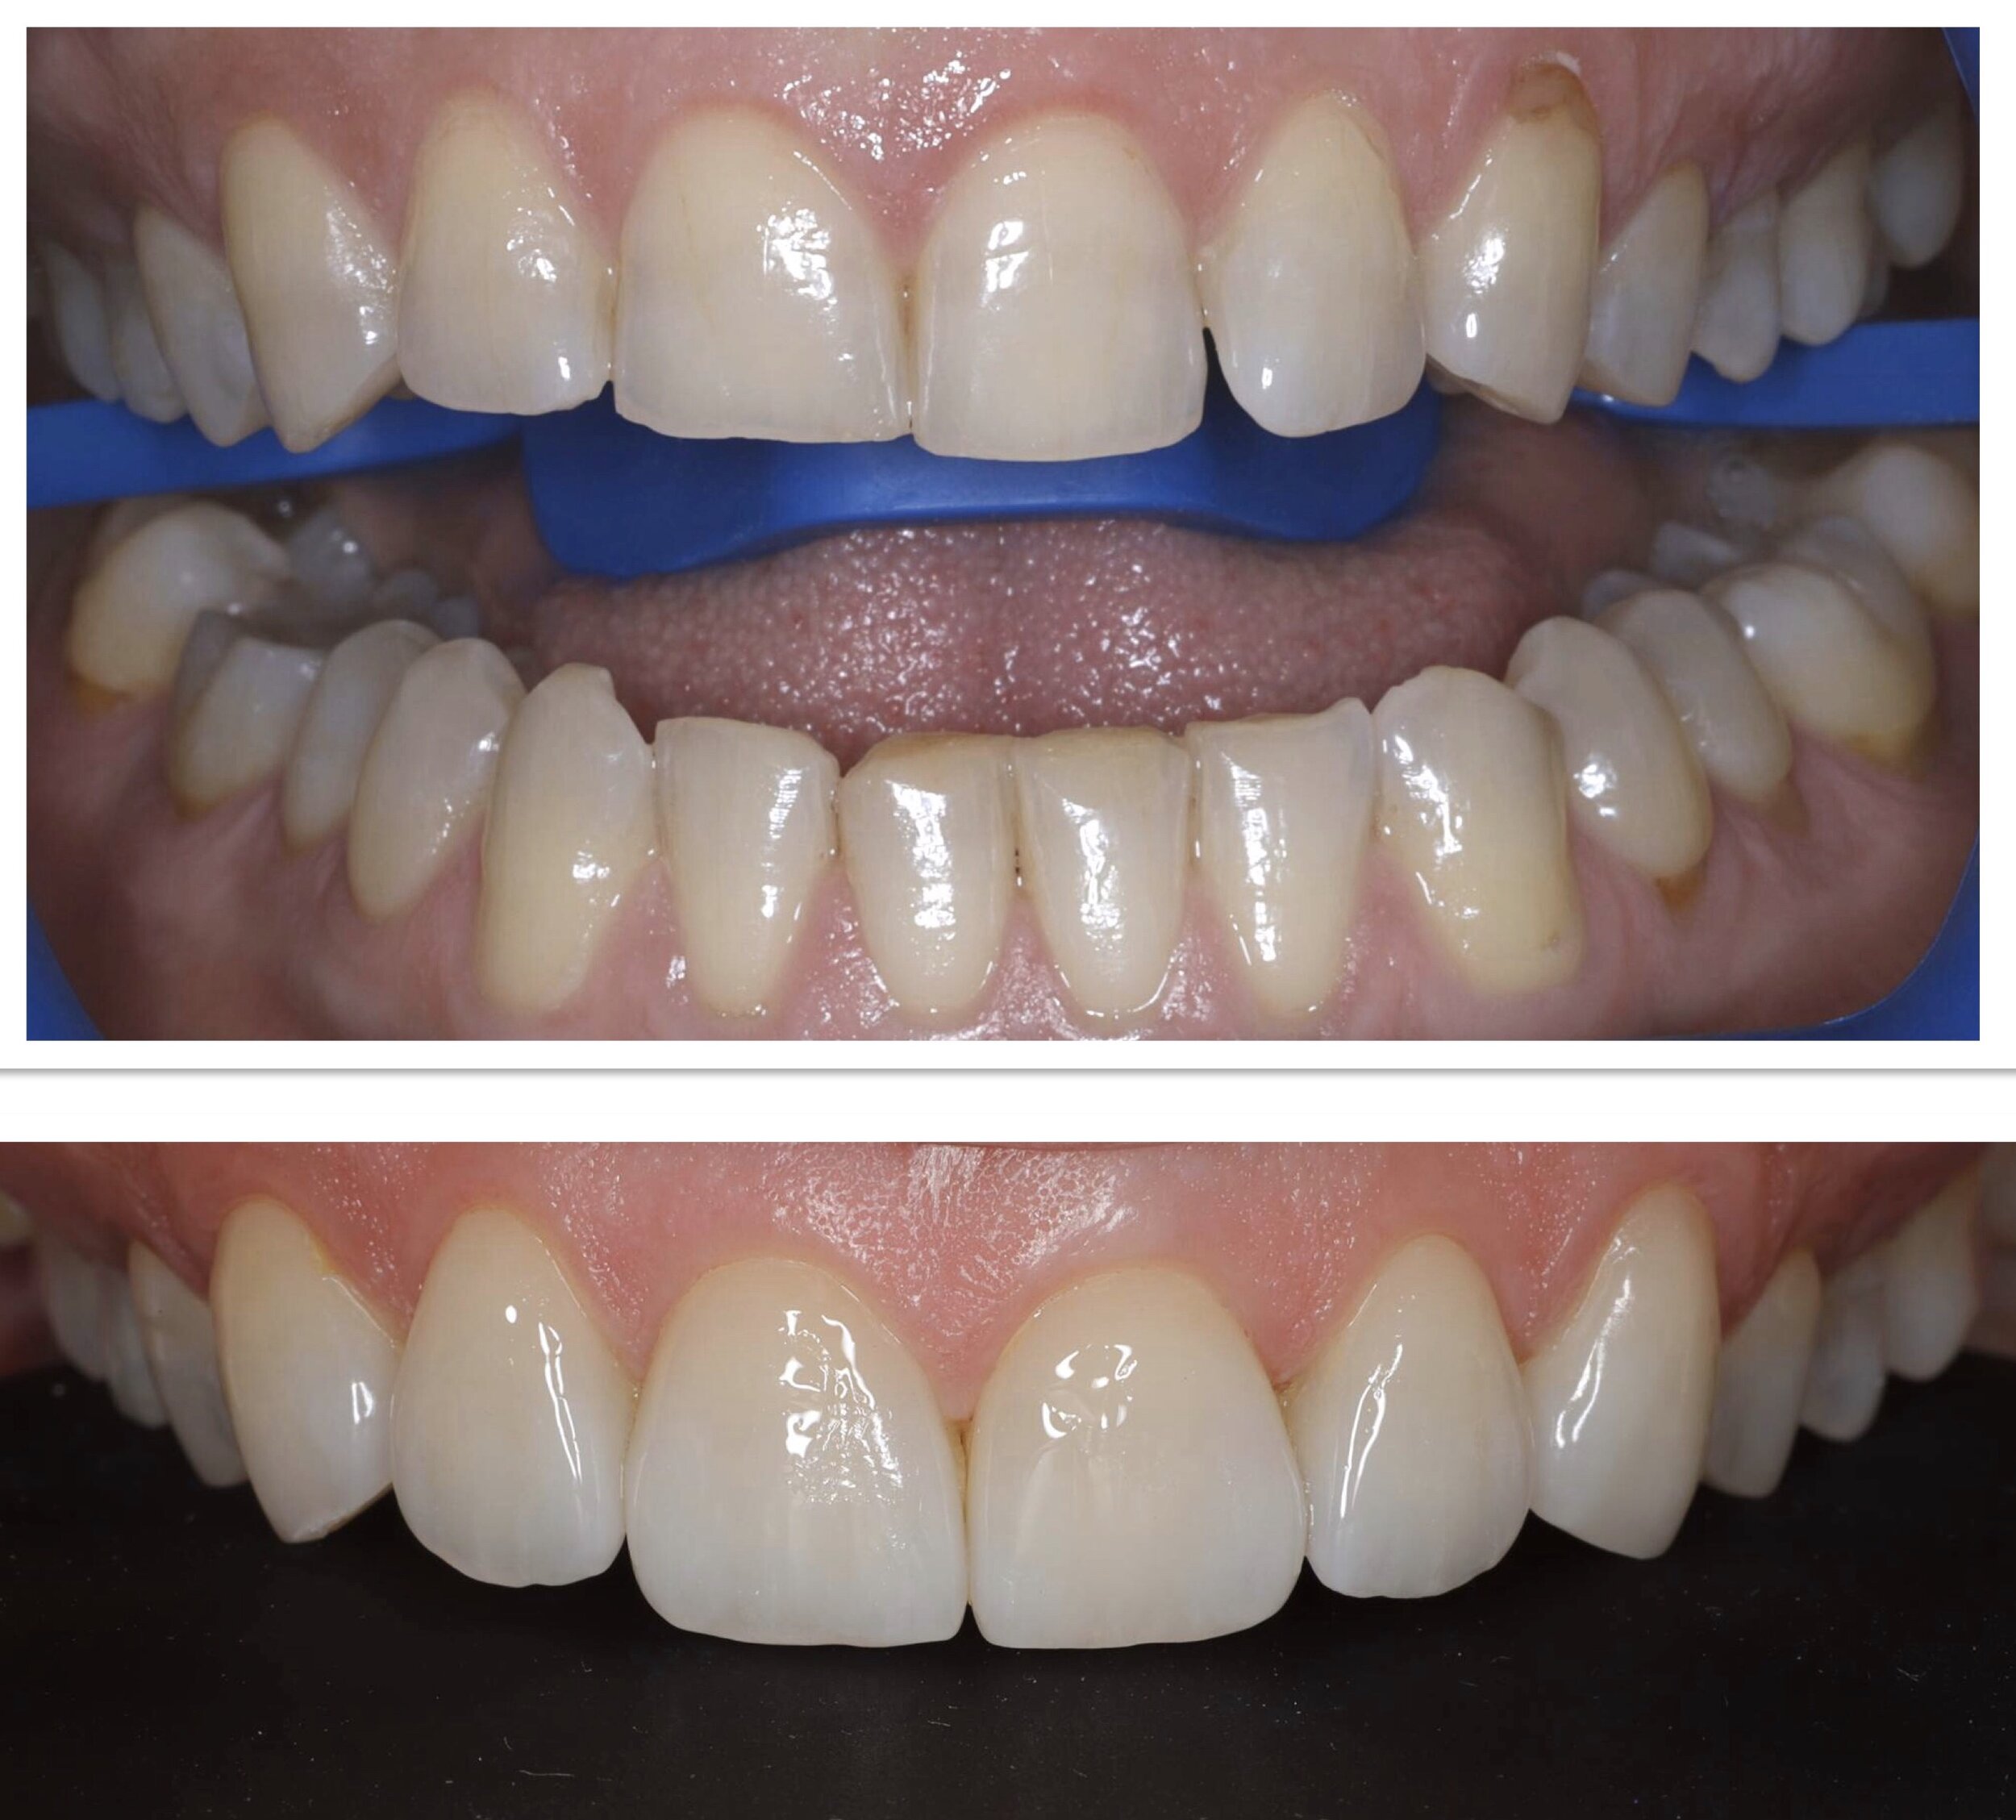 In office teeth whitening and porcelain veneers; female in 40's; Dr Leila Haywood and Christine Richards 2019